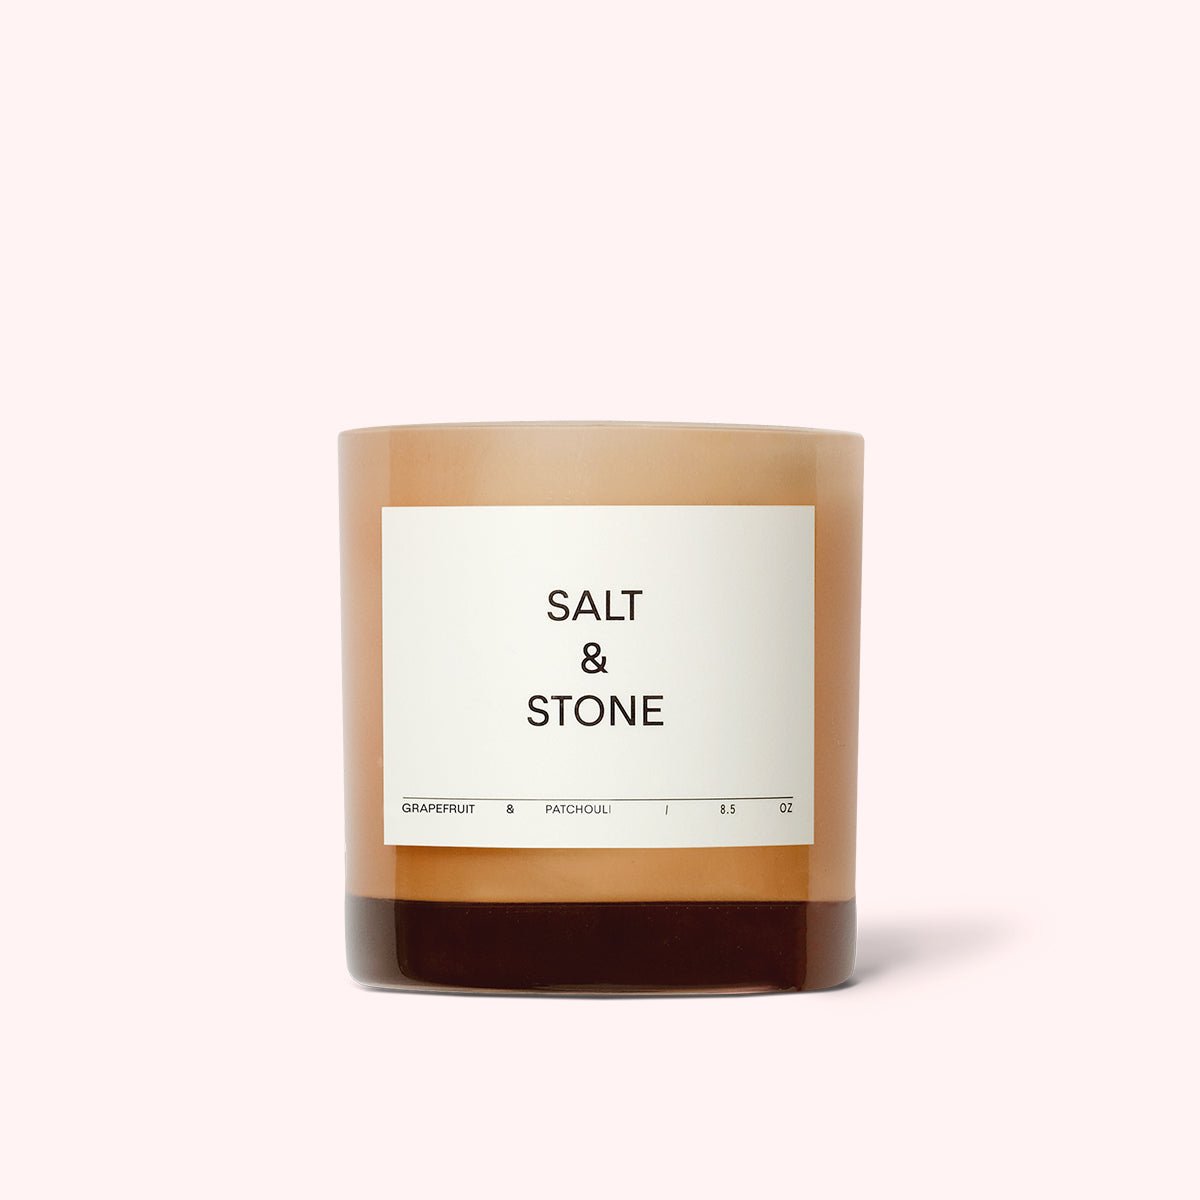 Light pink glass jar filled with a coconut and soy wax candle. The Grapefruit & Patchouli Candle is designed by Salt & Stone and made in Los Angeles, CA.